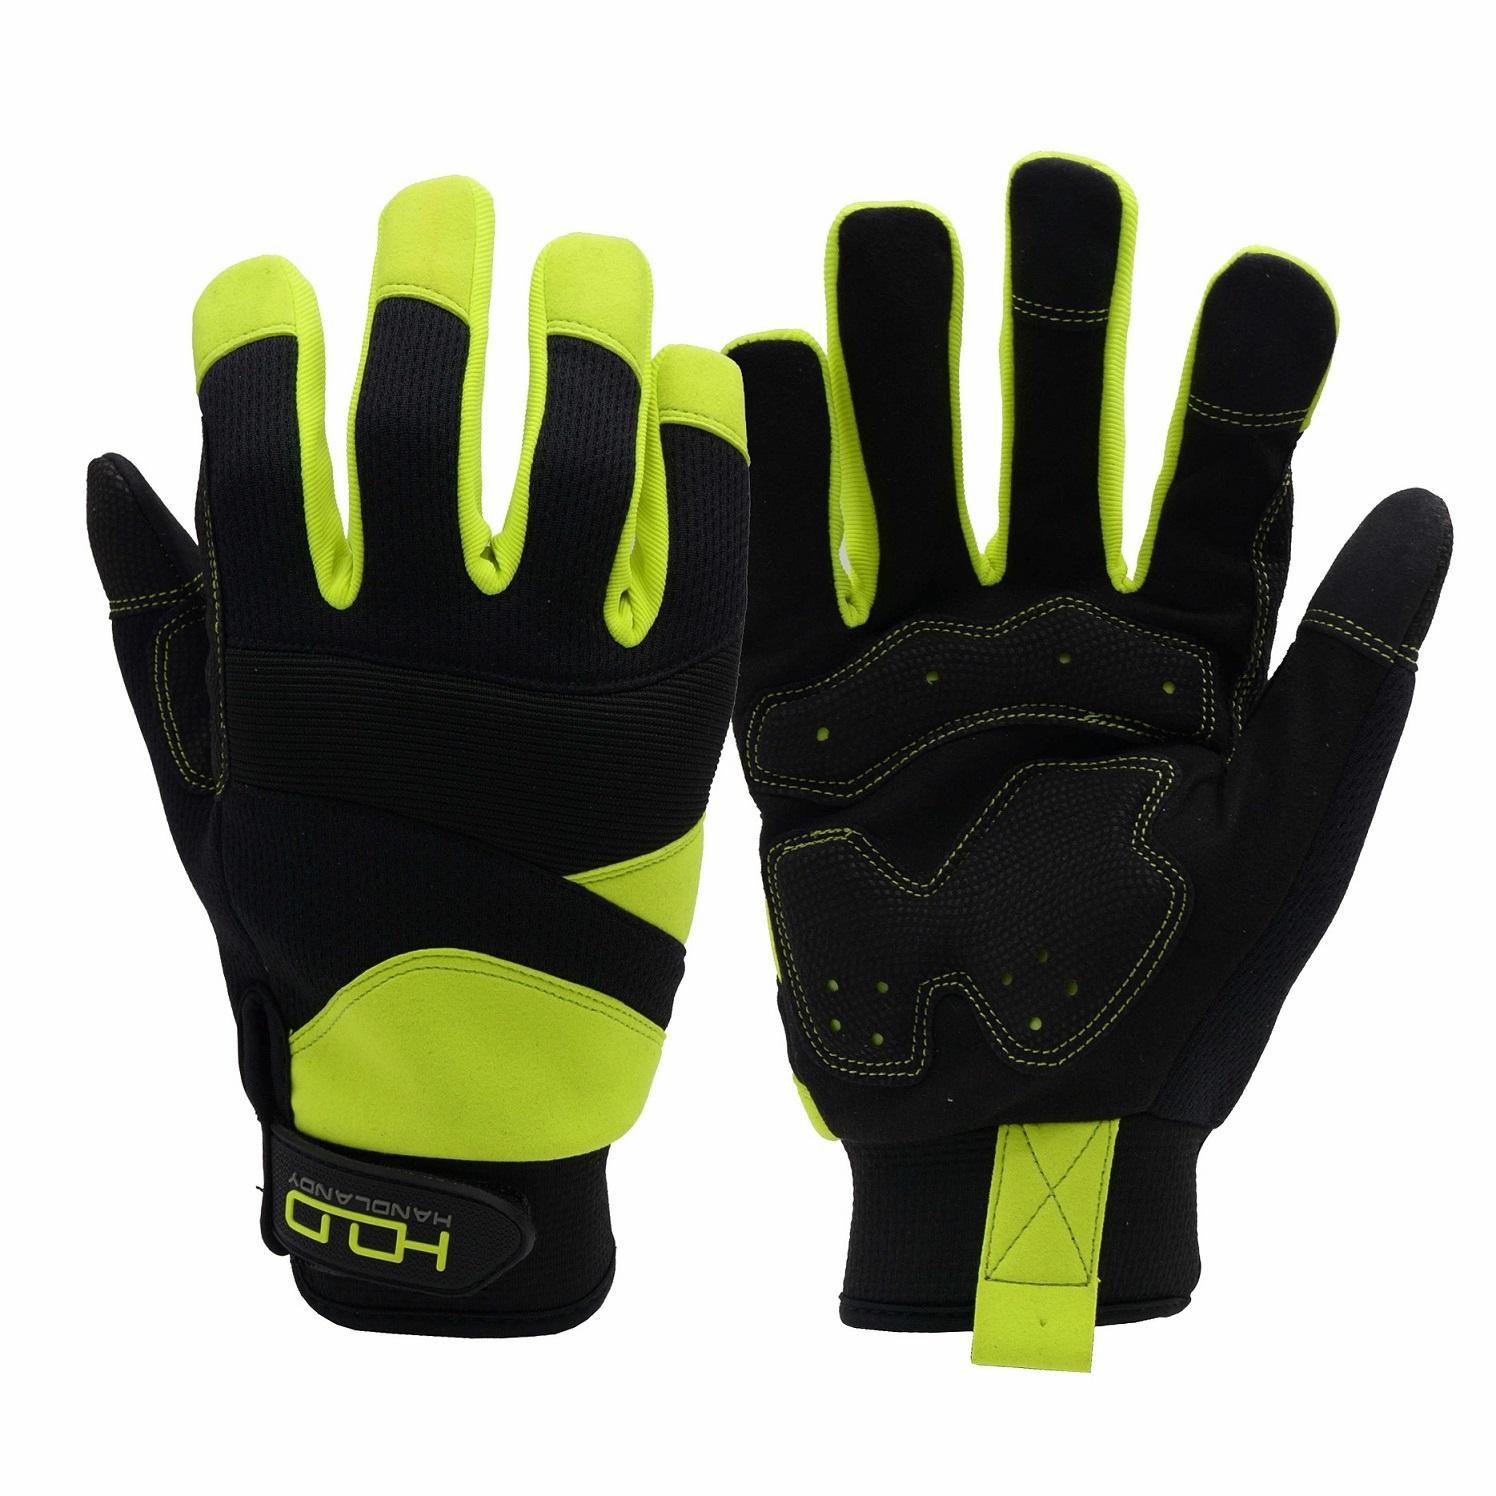 6027 PRISAFETY High Performance Gel Padded Palm Drilling Working Gloves Mechanical Vibration-Resistant Hand Gloves